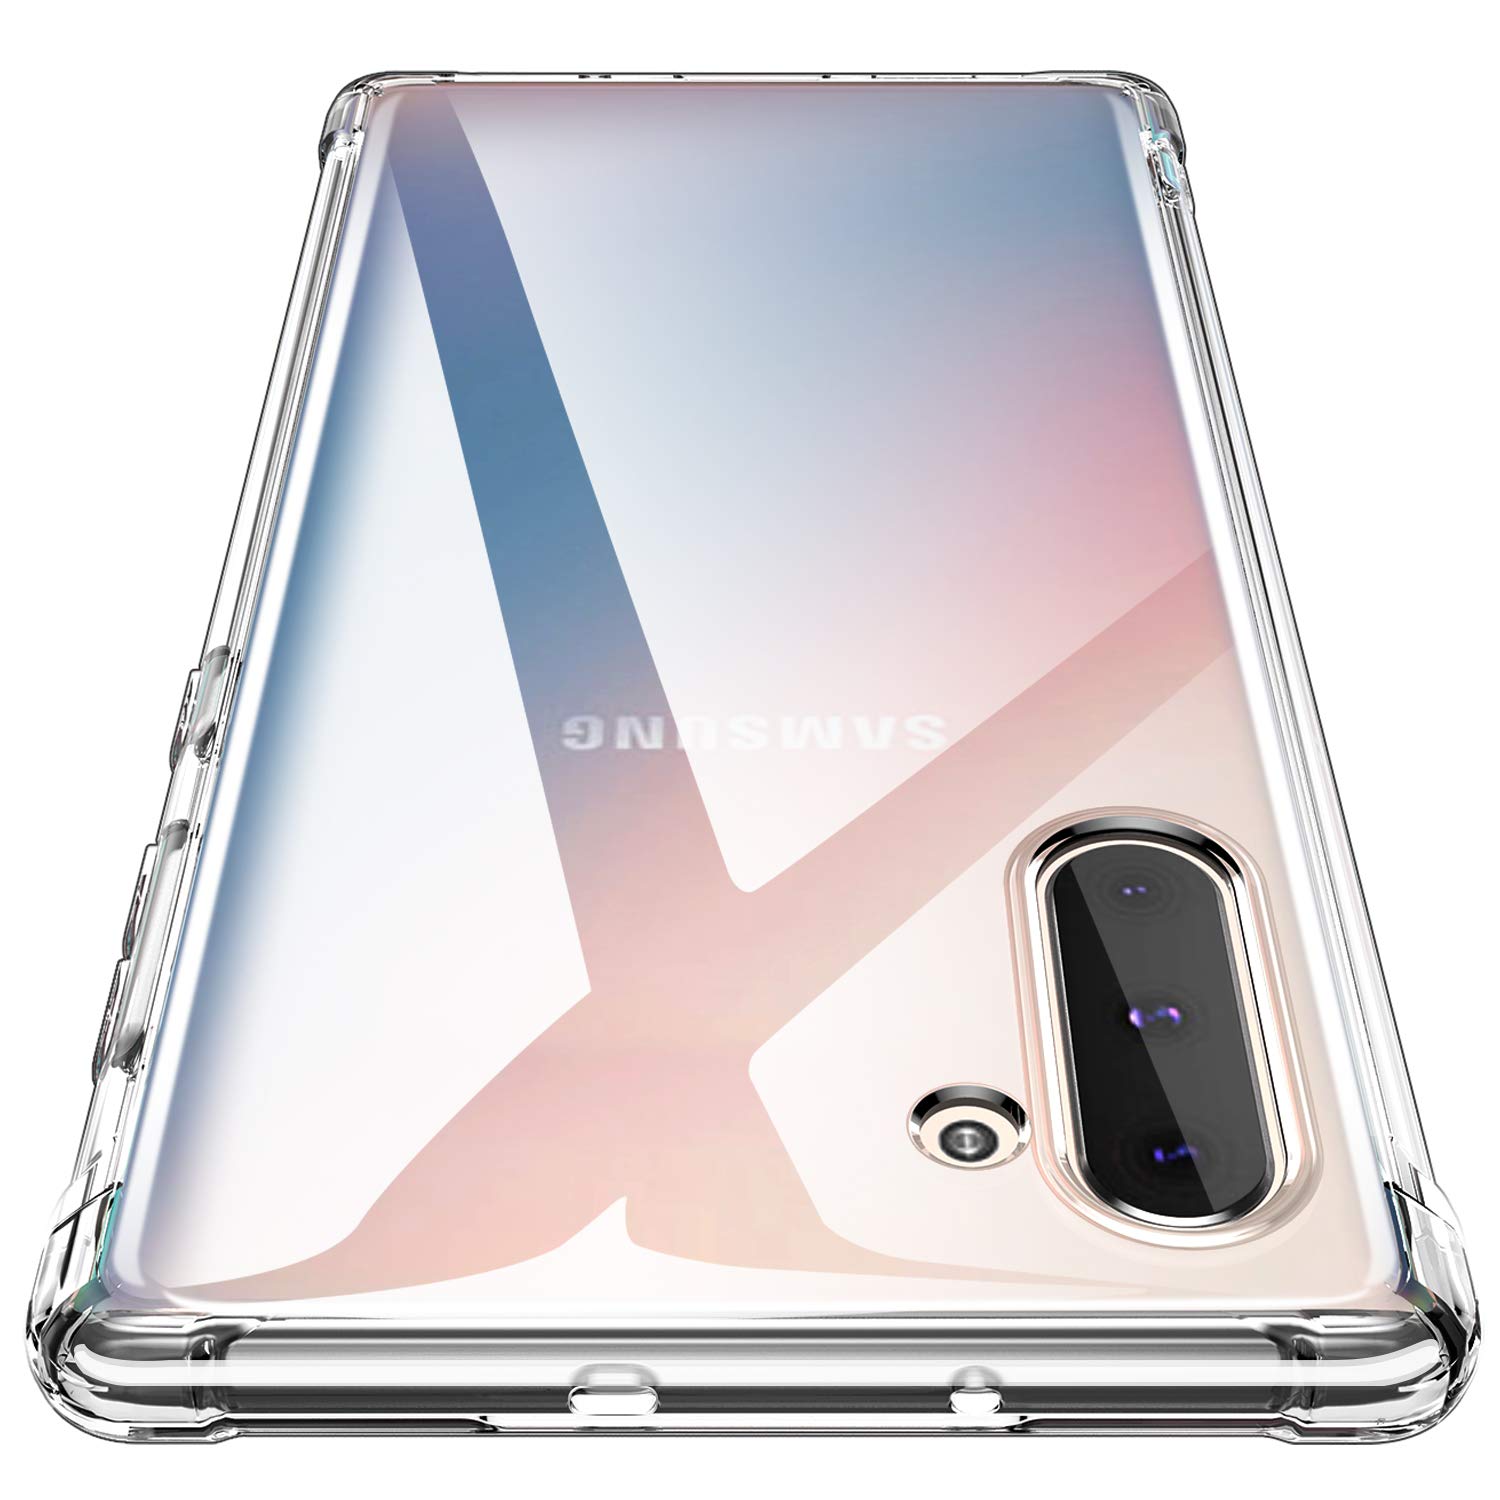 Book Cover AINOYA Compatible with Galaxy Note 10 Case, Clear Anti-Scratch Shock Absorption Cover Case for Samsung Galaxy Note 10 - Crystal Clear (Transparent)